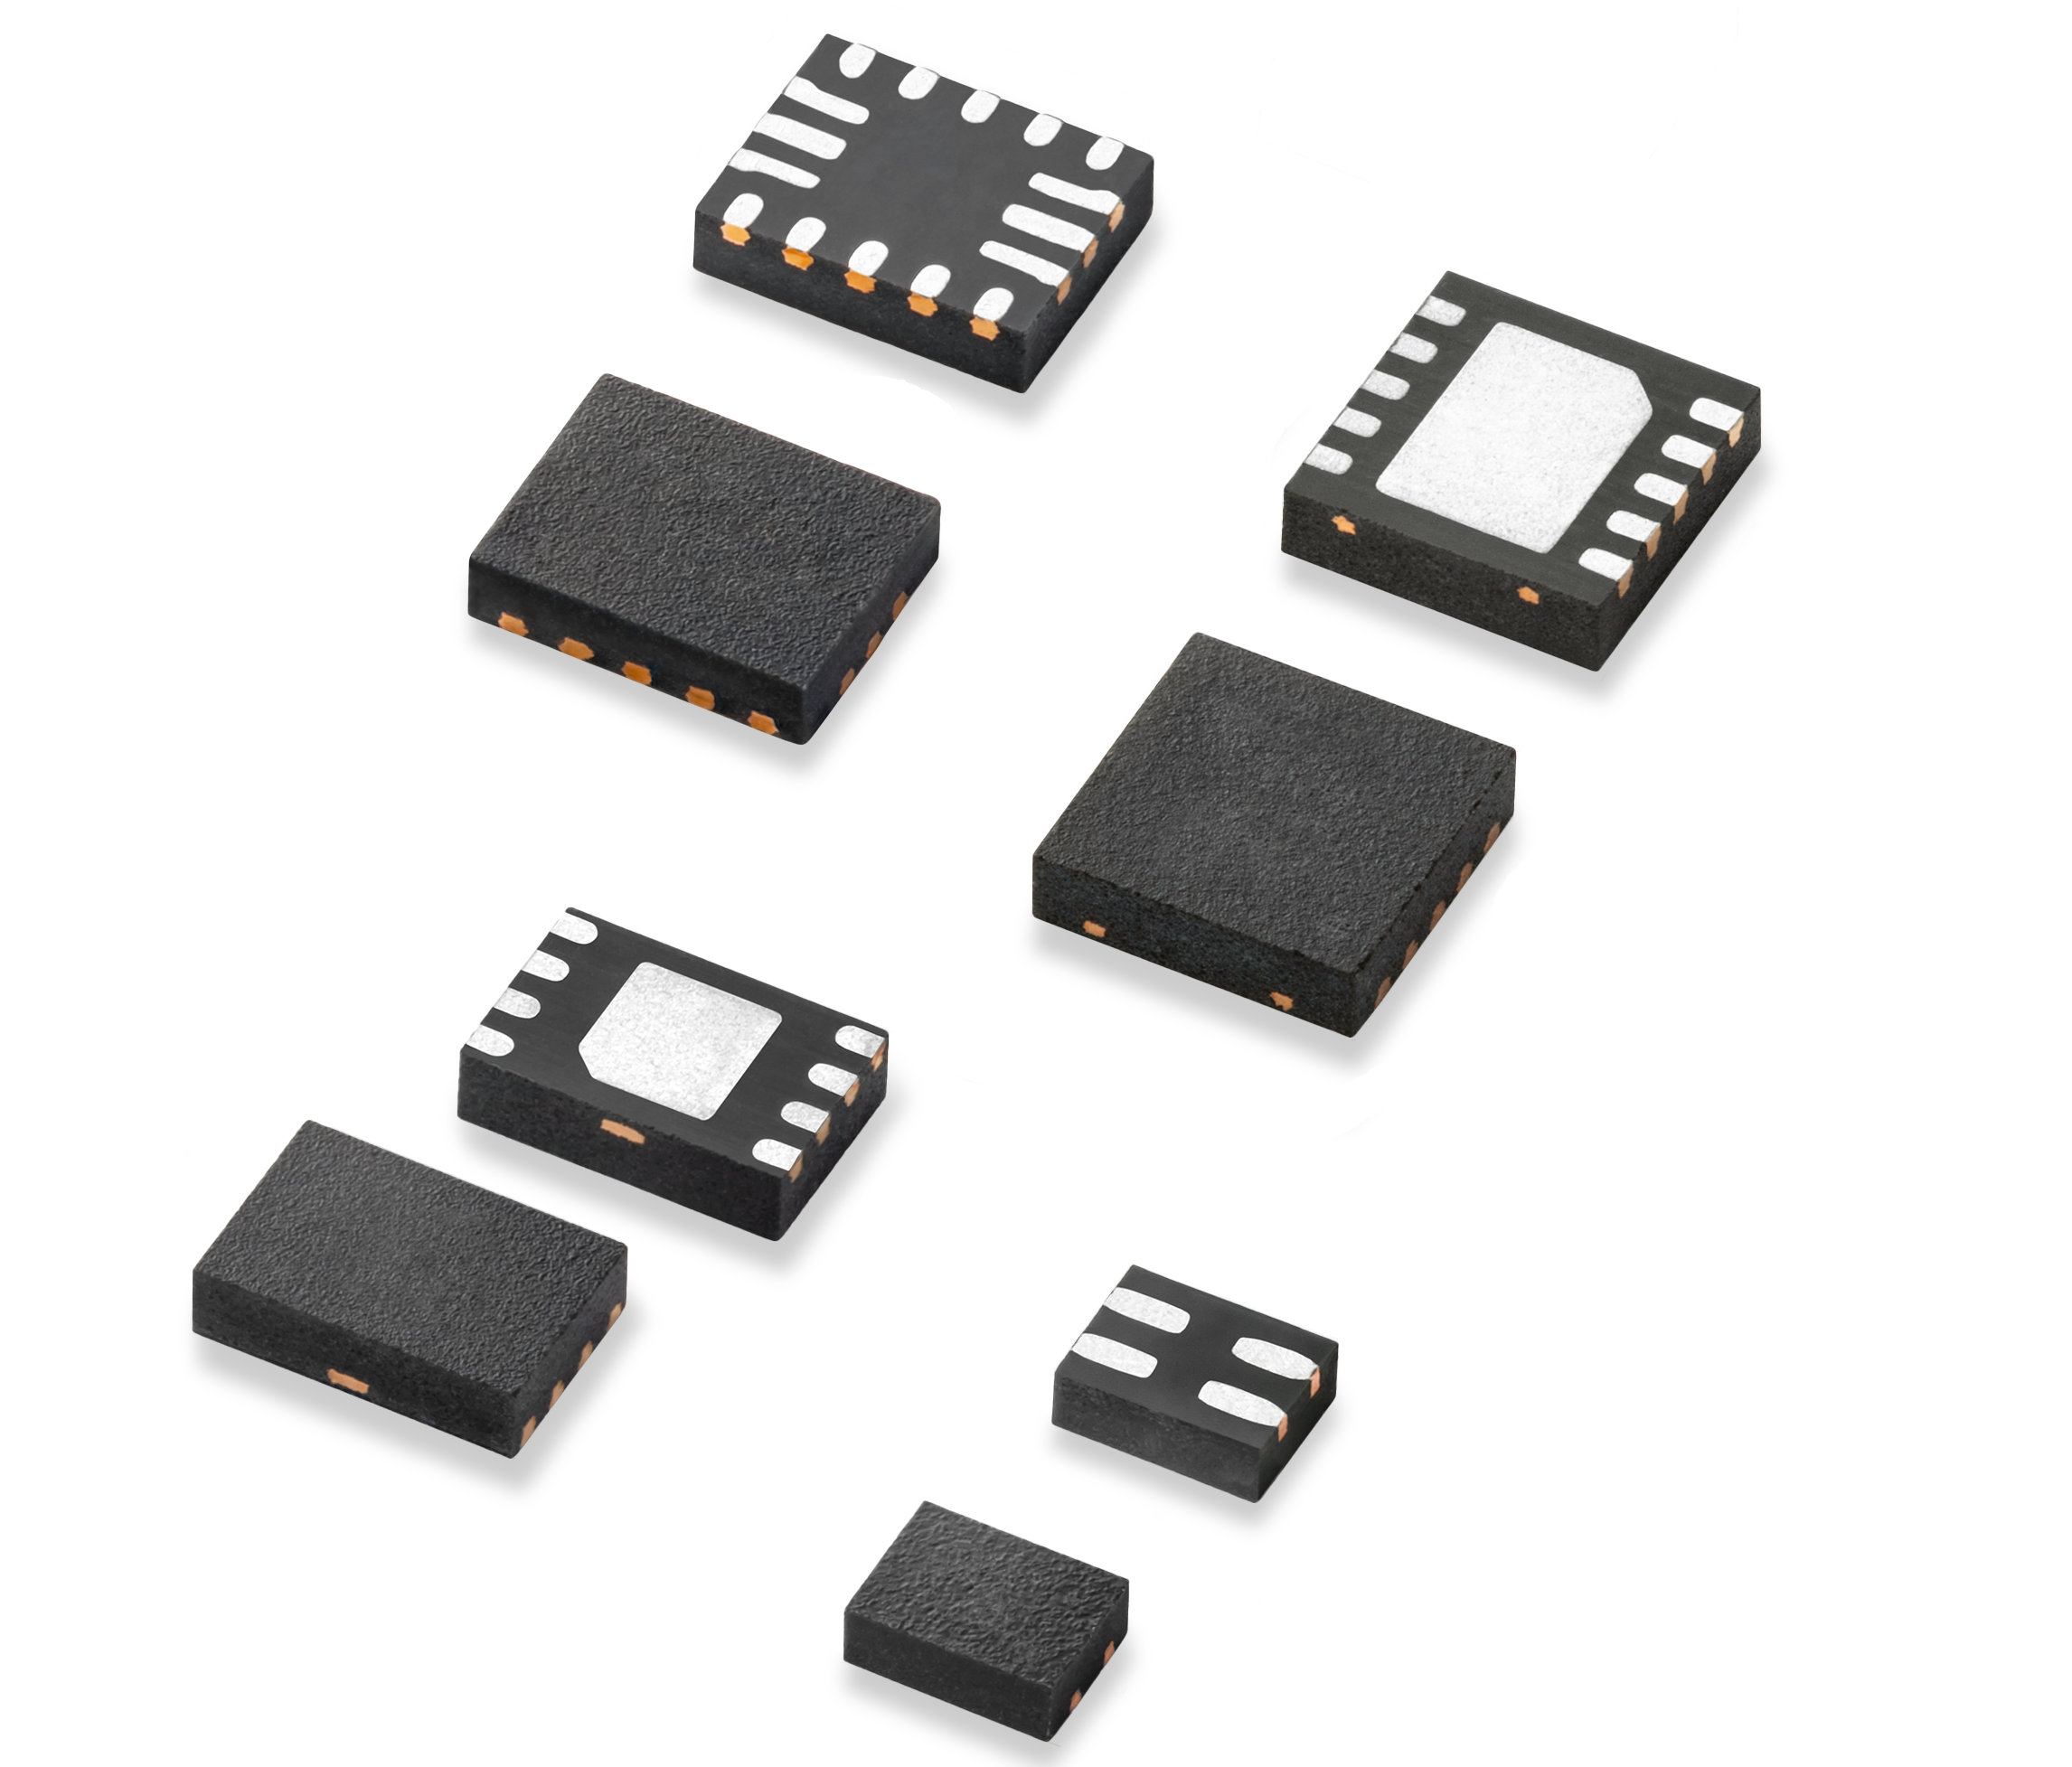 Littelfuse Expands eFuse Protection ICs Series to Address More Diverse, Demanding Applications